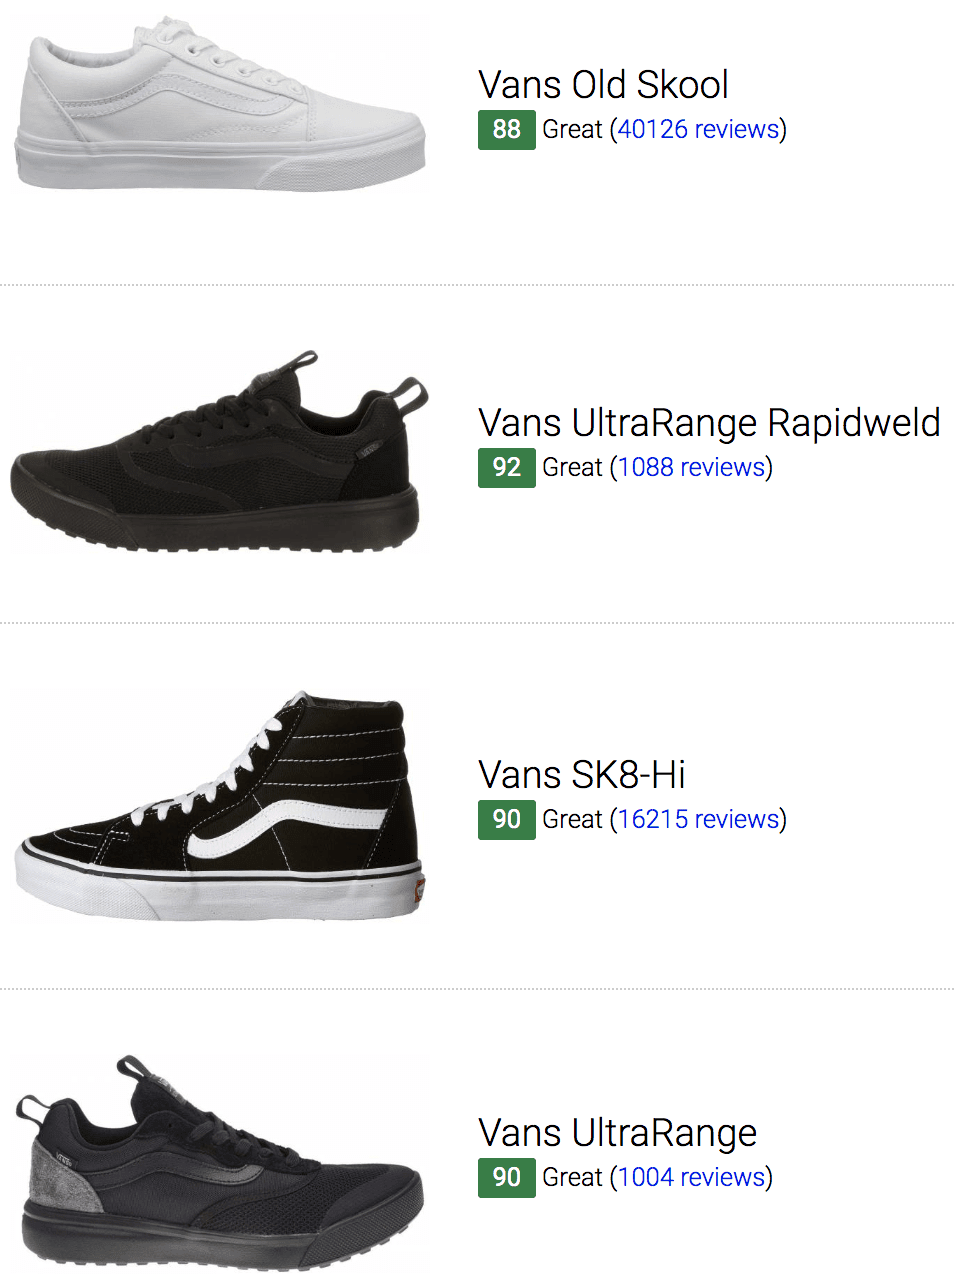 cheapest place for vans shoes